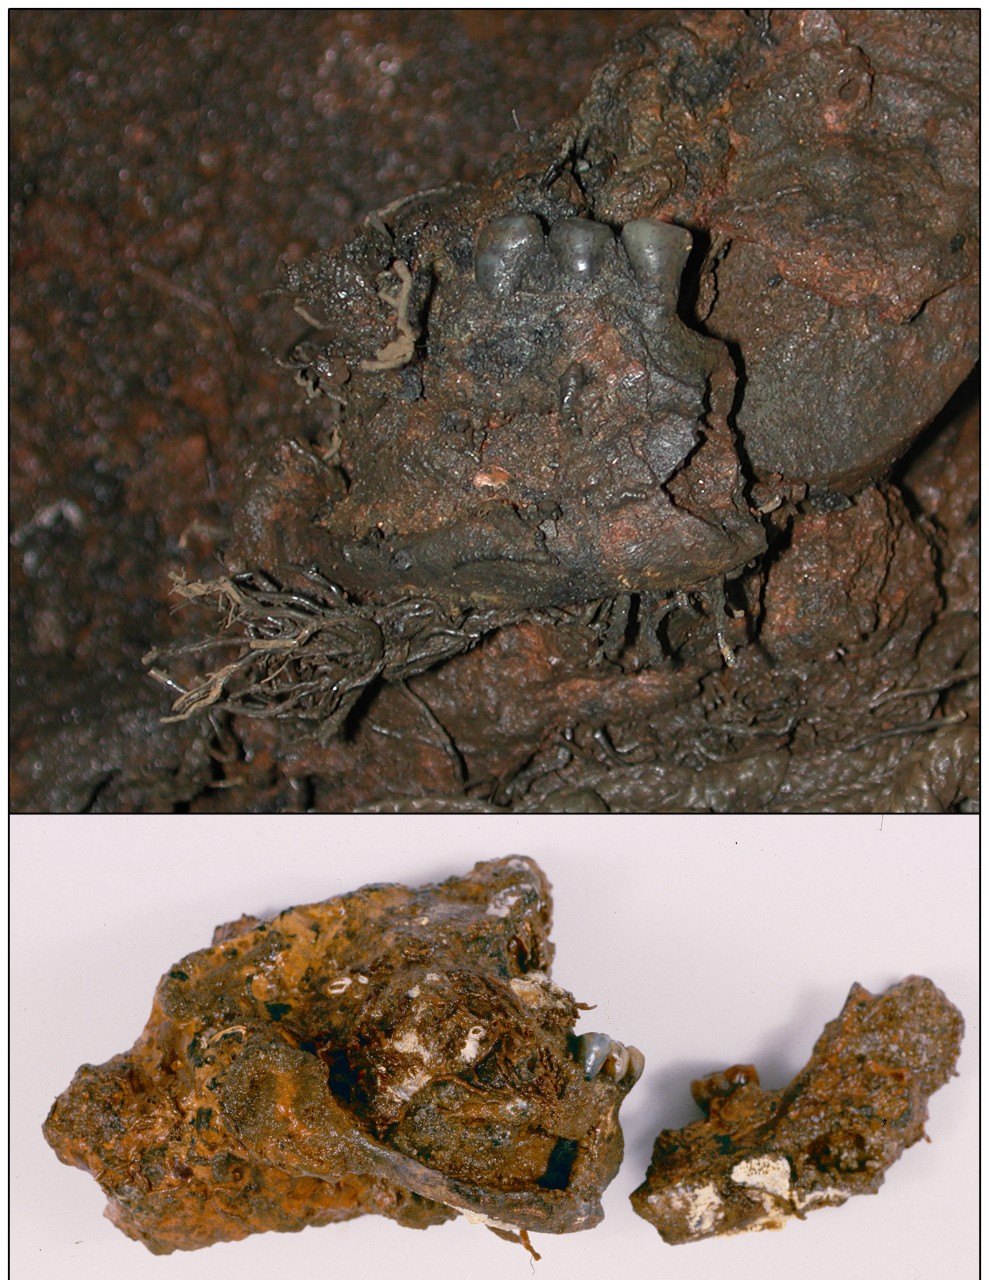 Two color photo of a partial human mandible. The top image shows the dark colored mandible with black teeth embedded in concretion still attached to a large cannon. The bottom shows two pieces of the mandible after removal from the cannon, still ...